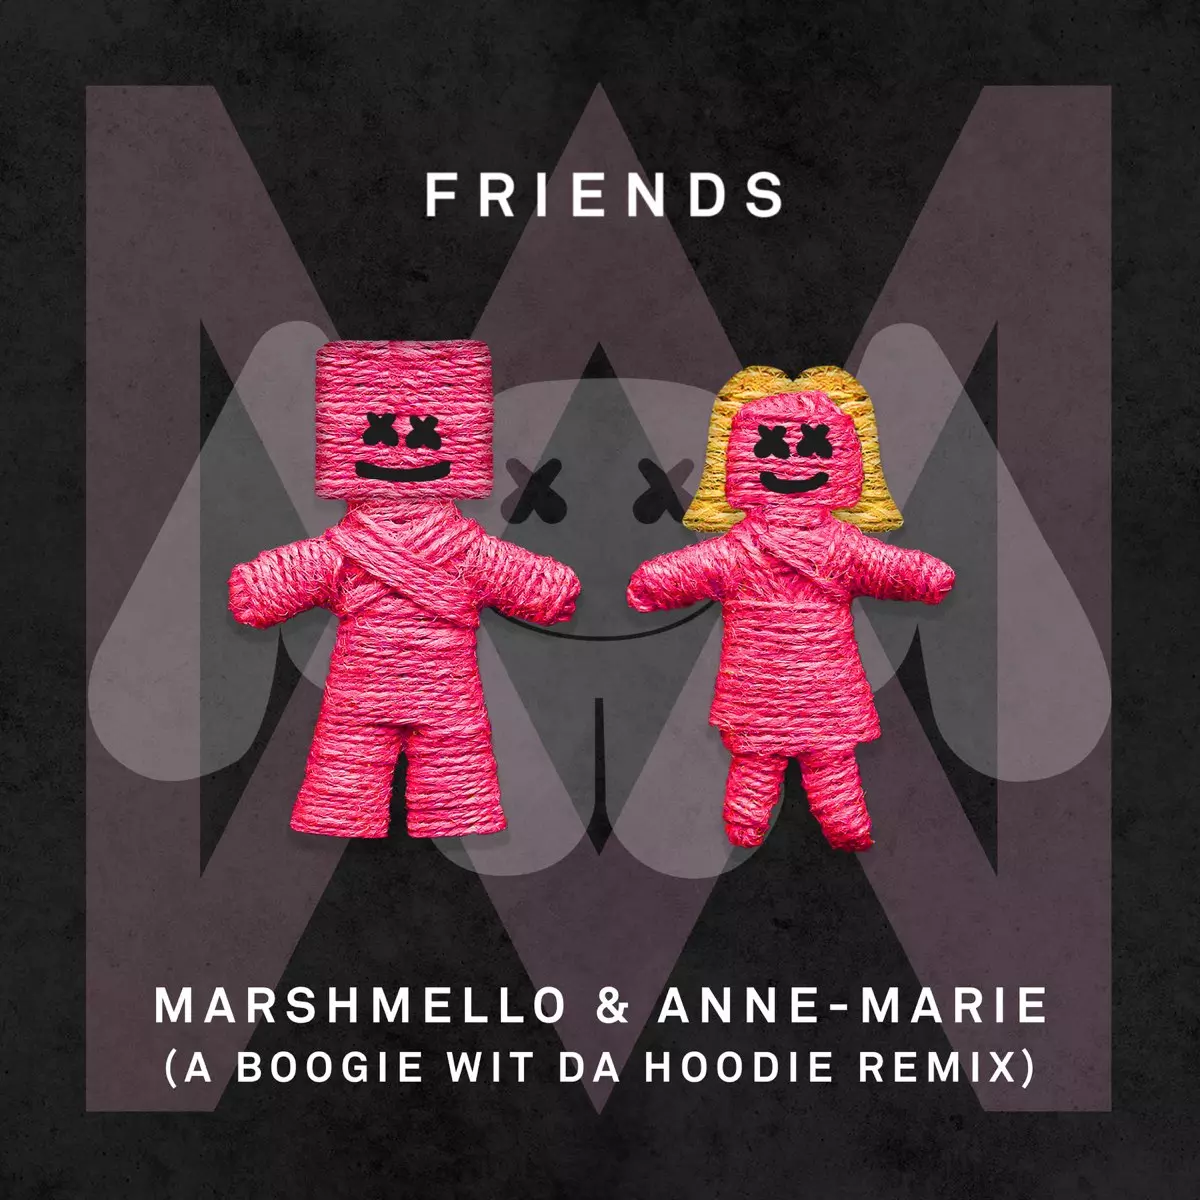 FRIENDS (A Boogie wit da Hoodie Remix) - Single by Marshmello & Anne-Marie on Apple Music